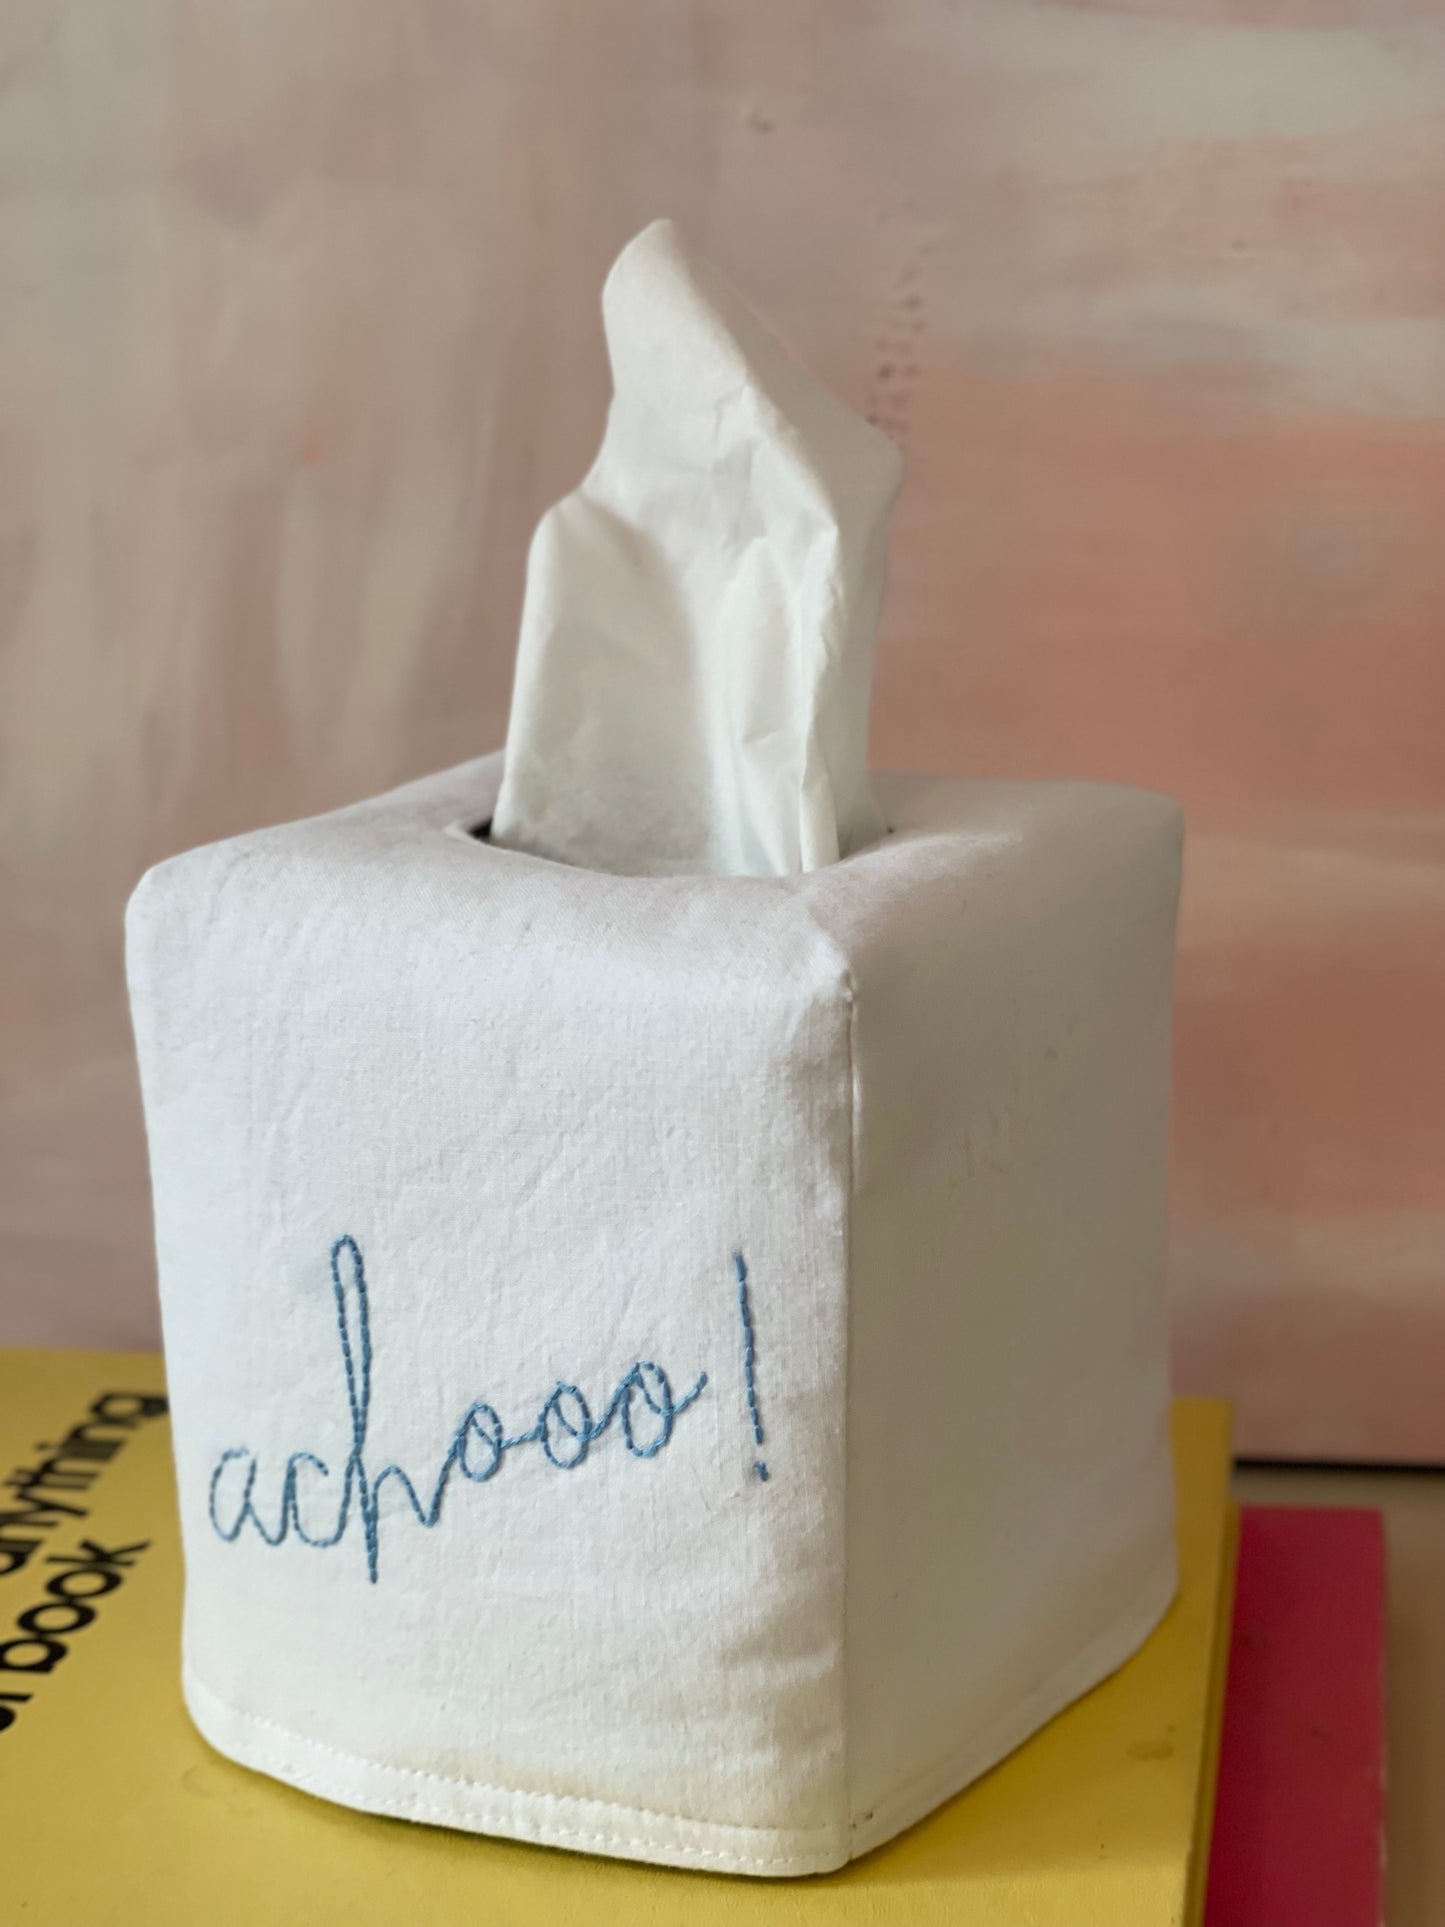 Embroidered Tissue Box Cover